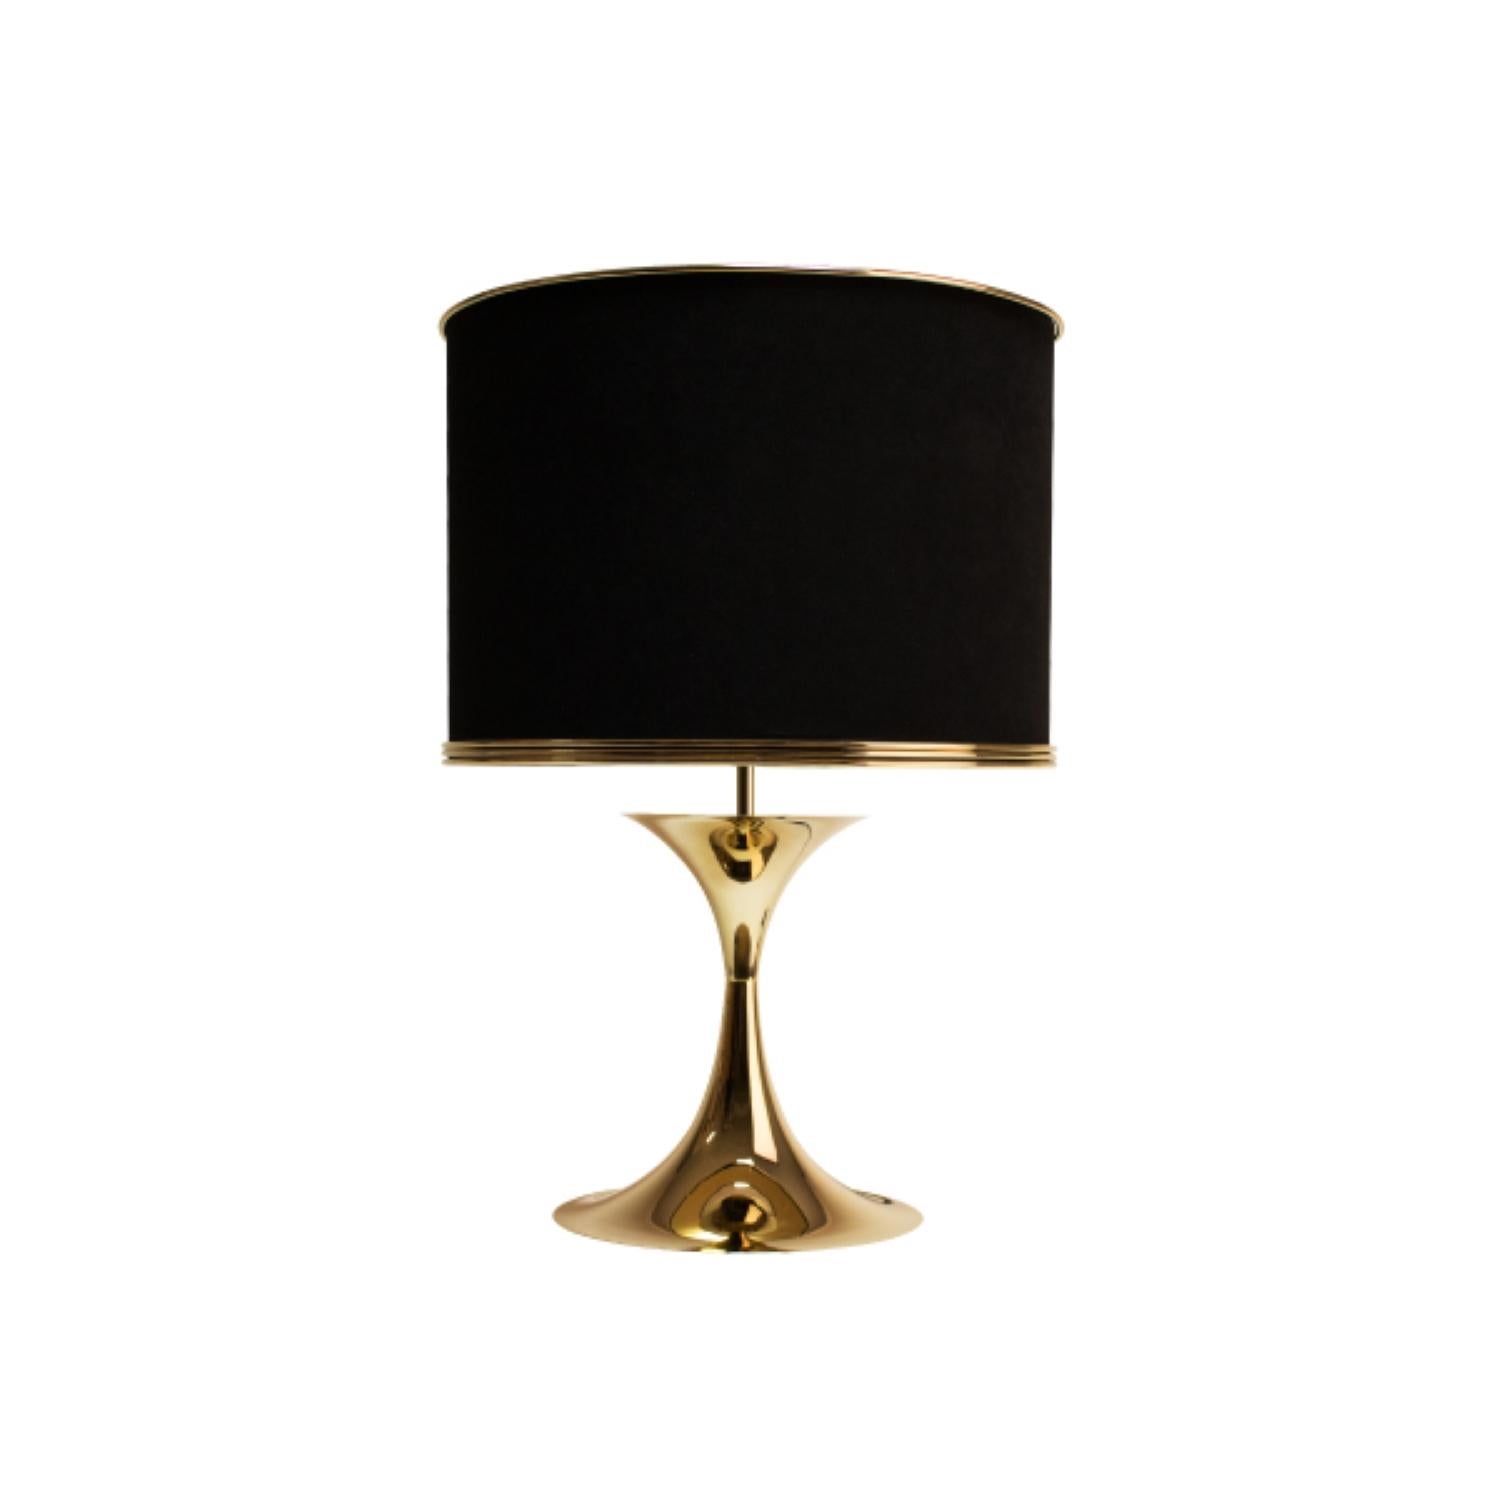 Montreal is quite known for the largest jazz festival in the world, International Jazz Festival. The Montreal table lamp is a contemporary lighting piece which honours the artistic output of the city’s jazz history, capturing innovation and